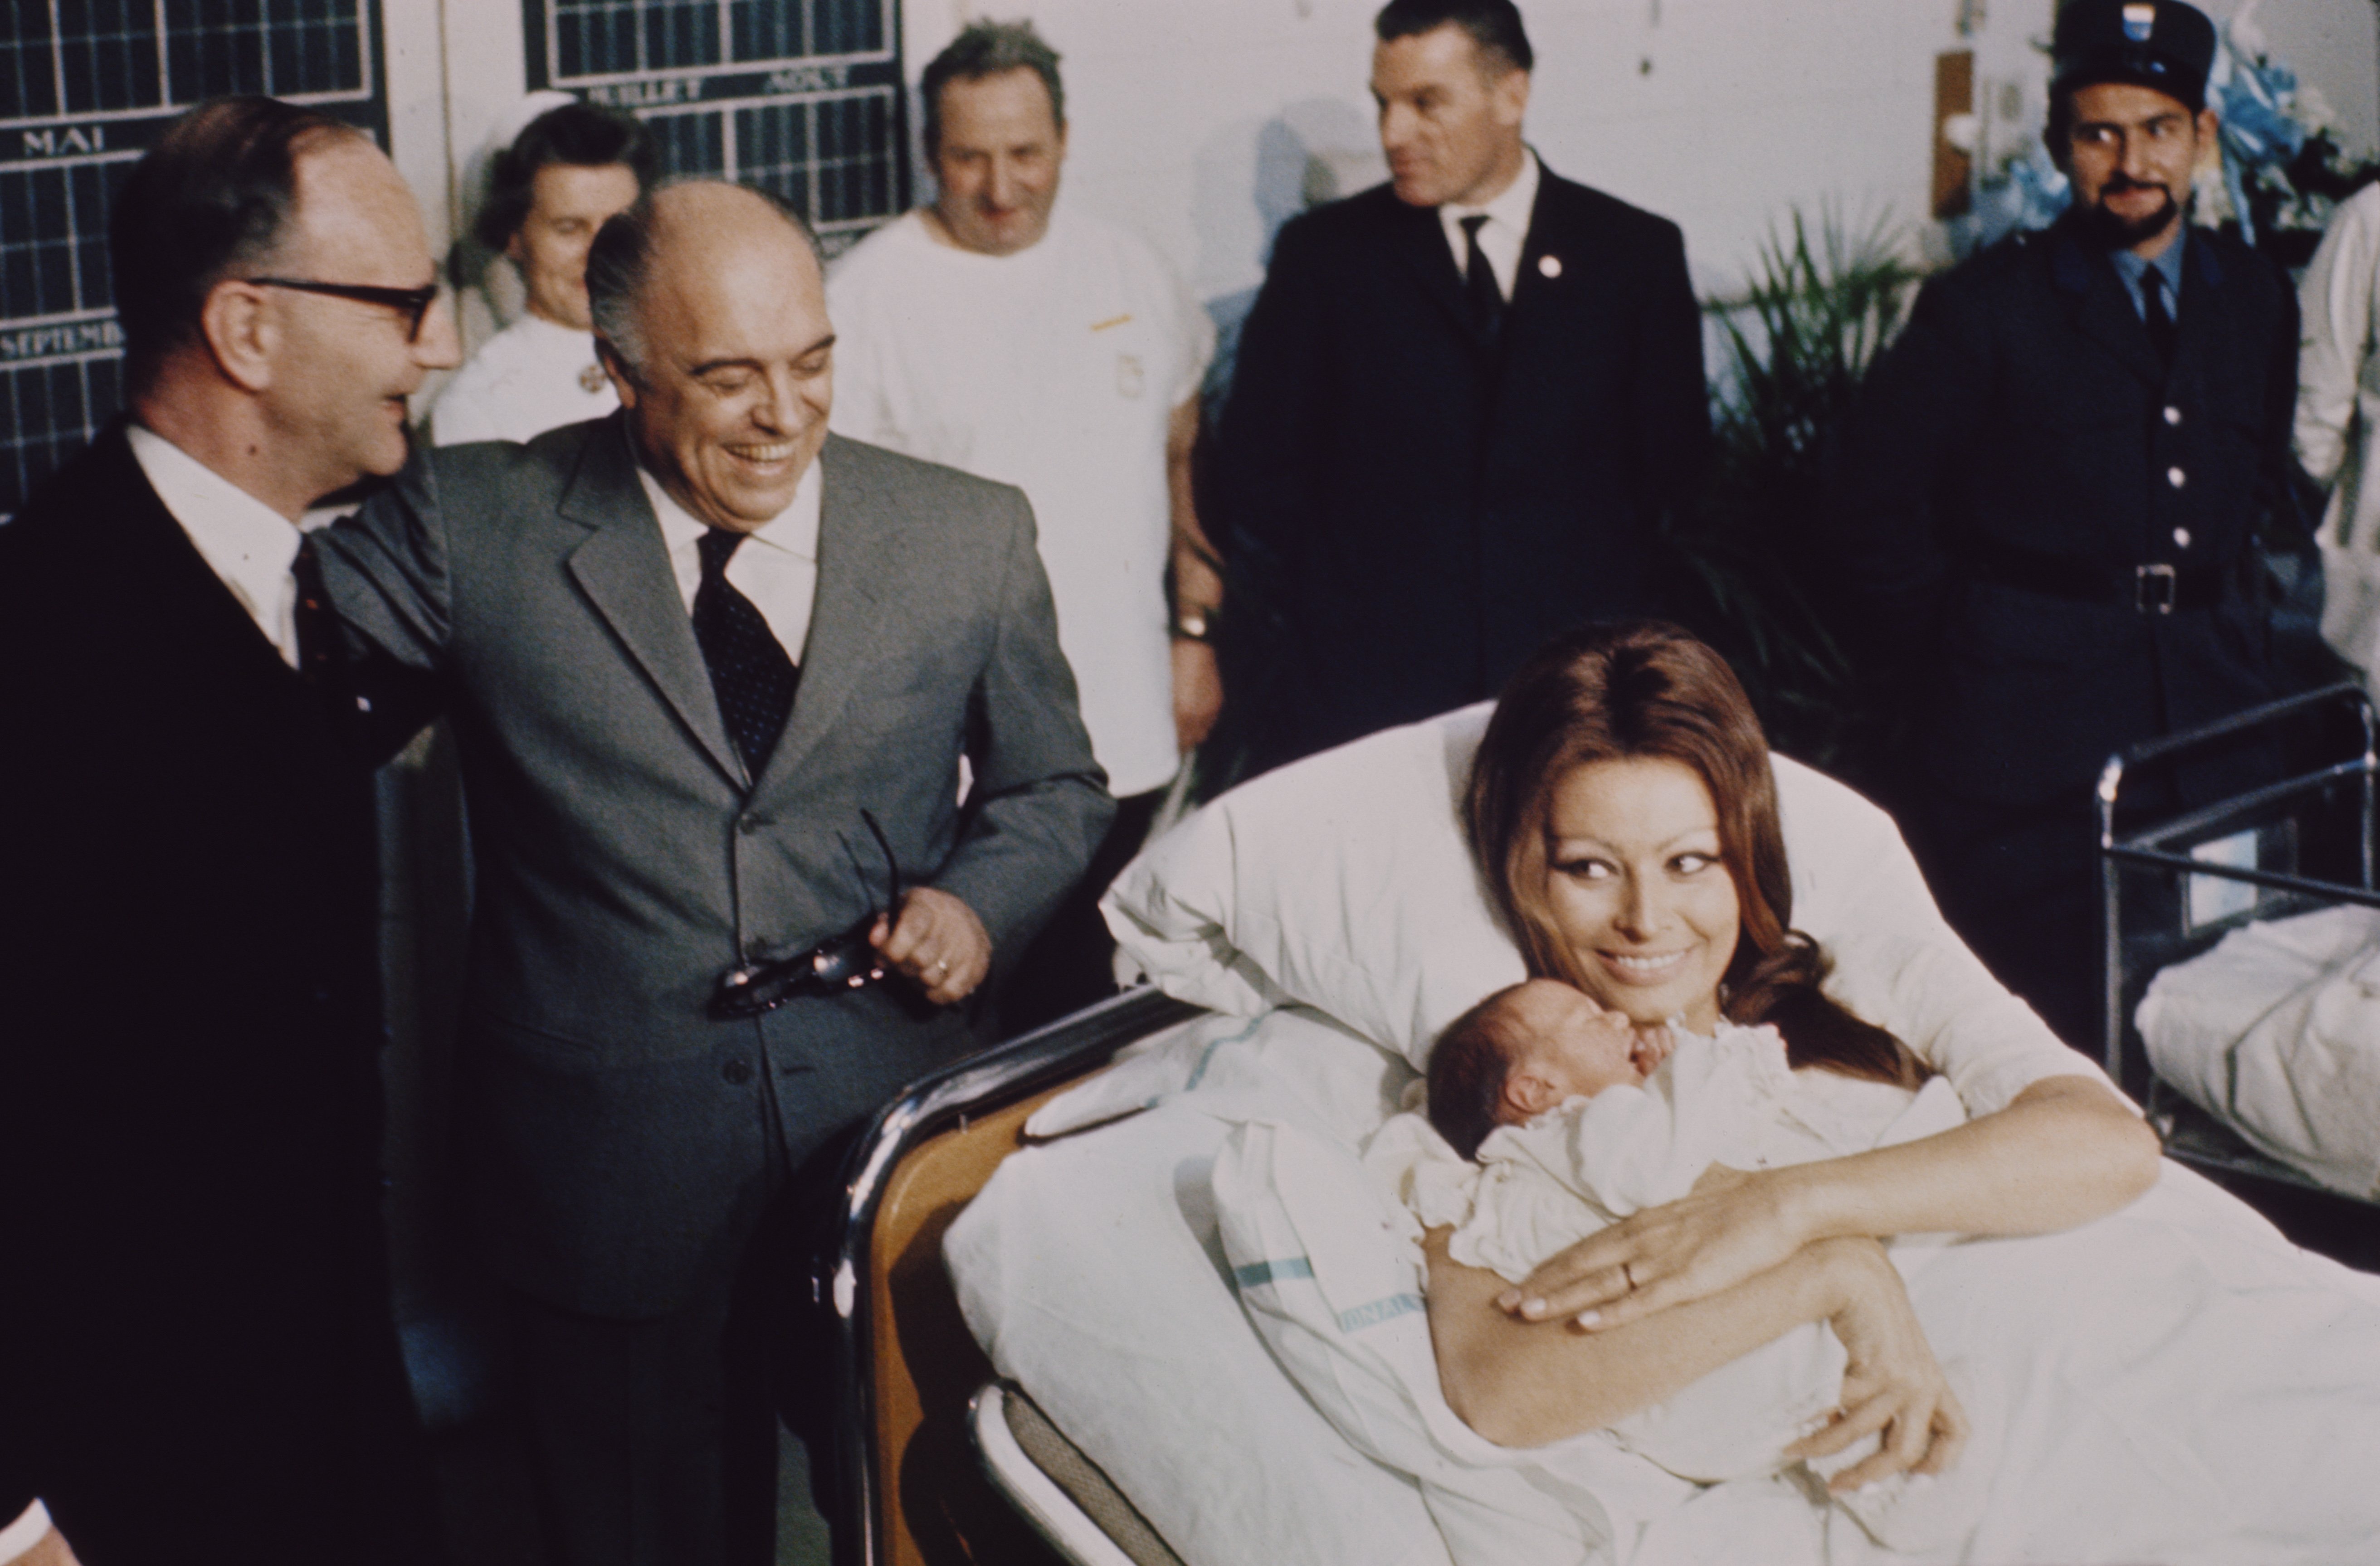 Sophia Loren lies in a hospital bed in a maternity clinic holding her newborn son Carlo junior with her husband Carlo Ponti standing beside the bed on January 4,1969 in Geneva, Switzerland. | Photo: Getty Images